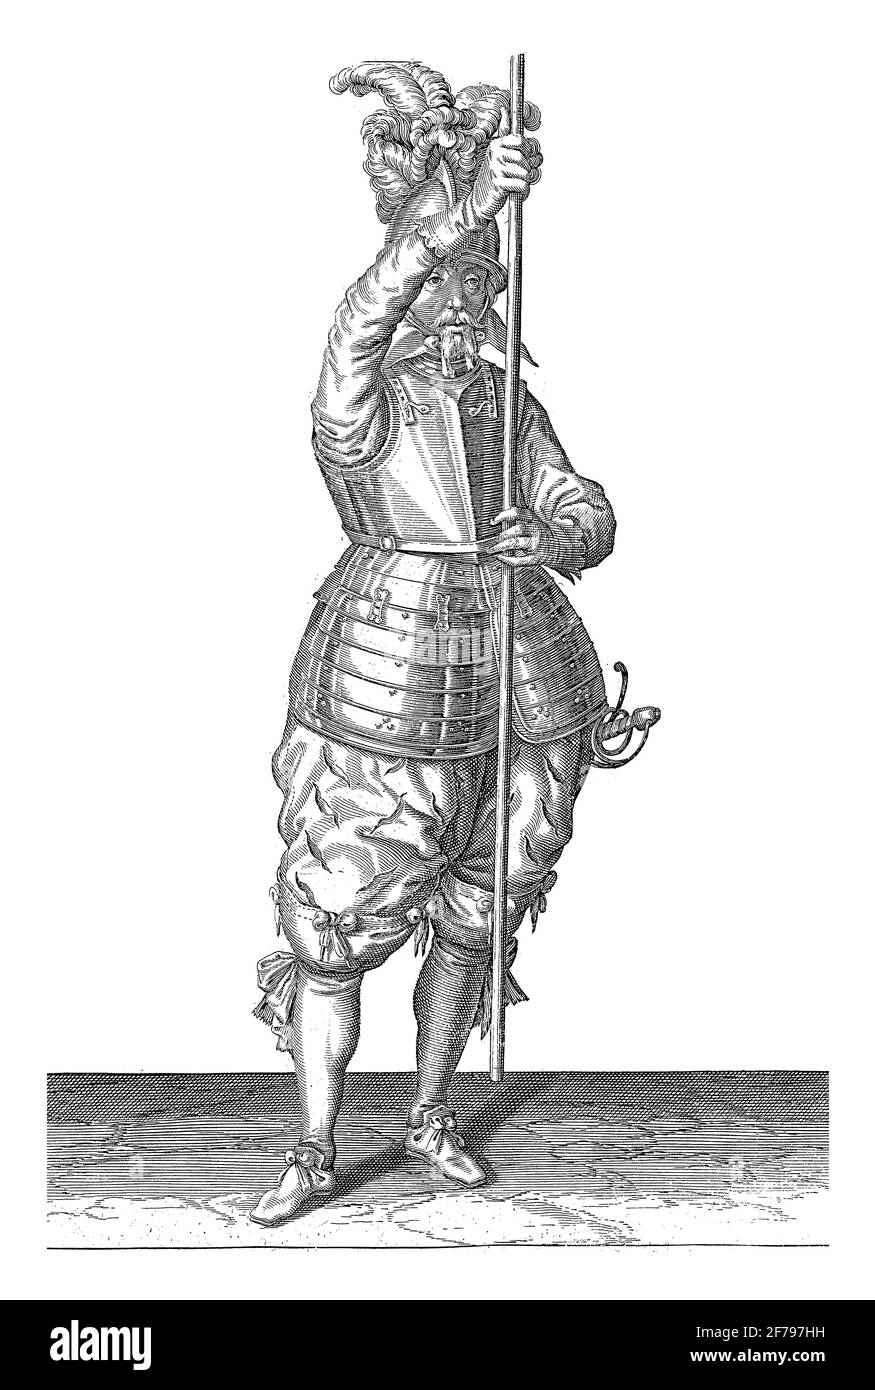 A full-length soldier holding a skewer (lance) with both hands upright in front of him slightly above the ground, vintage engraving. Stock Photo